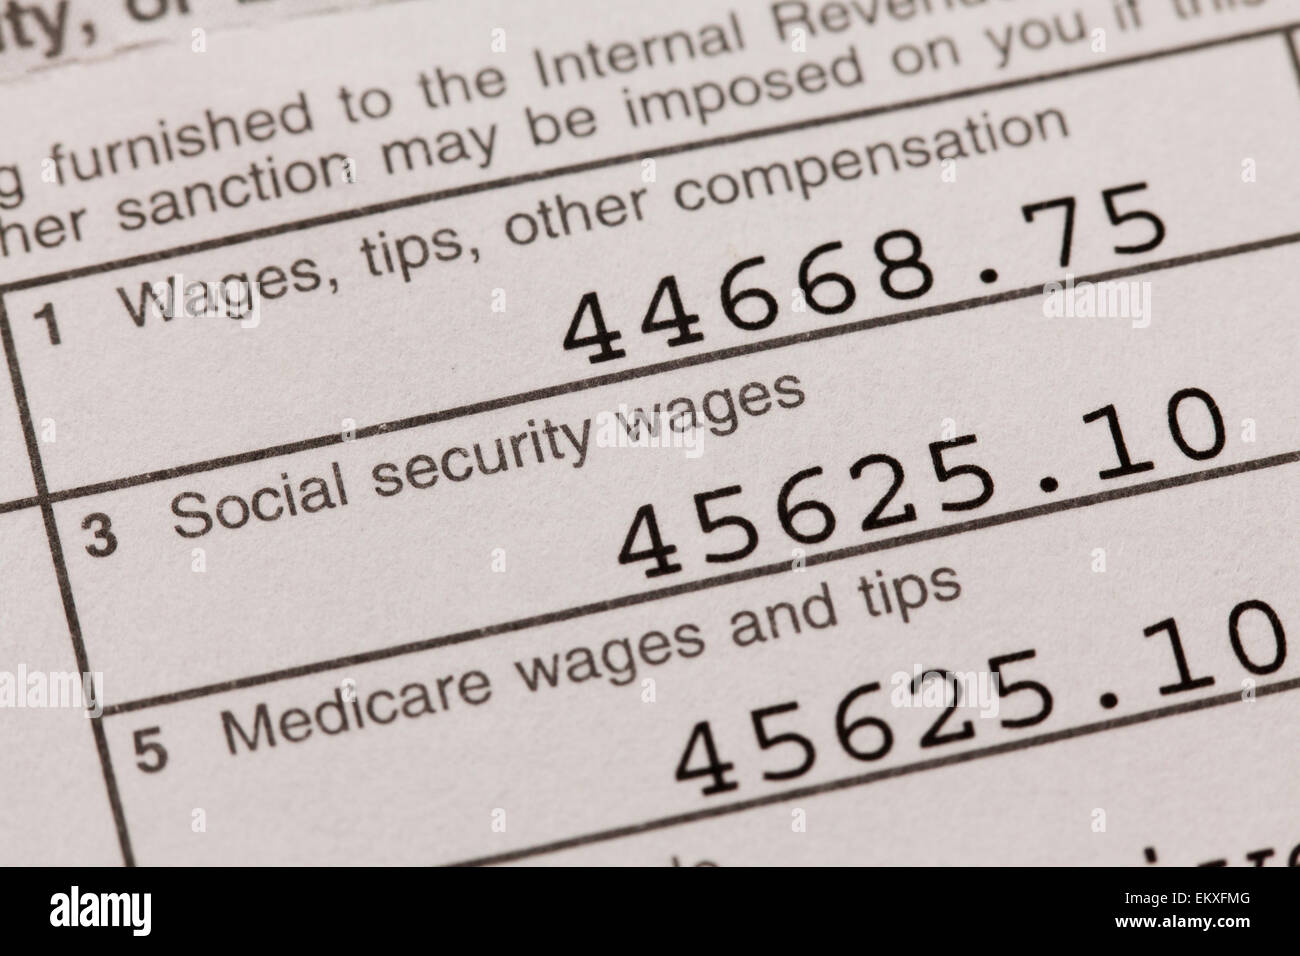 Taxes withheld on W-2 form - USA Stock Photo